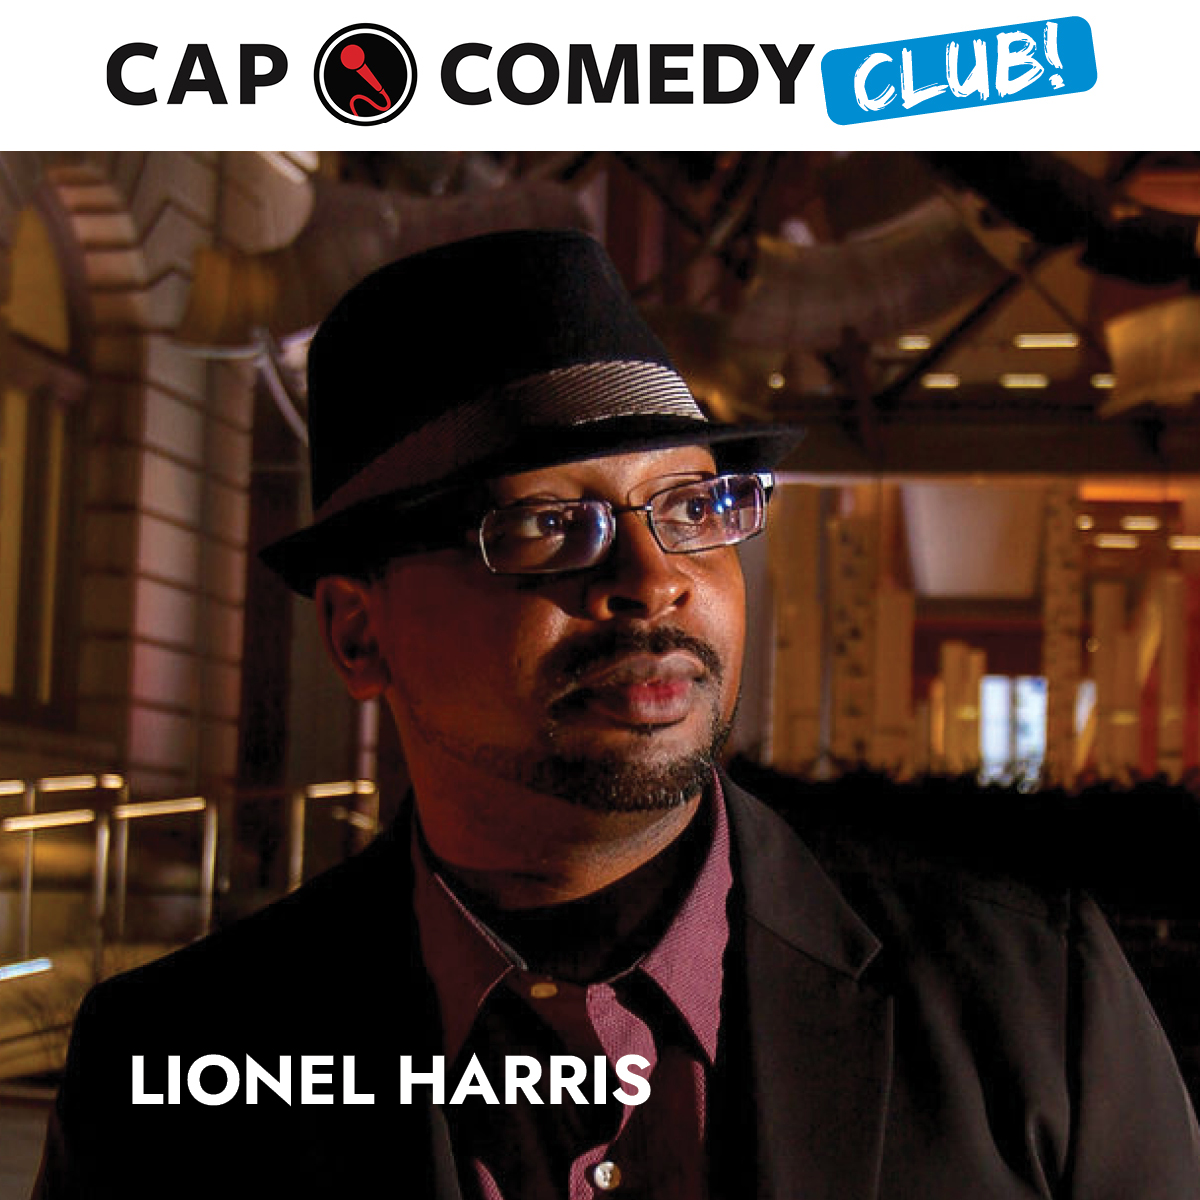 Image for CapComedy Club: Lionel Harris  with David Griffen and host GD Fenderson